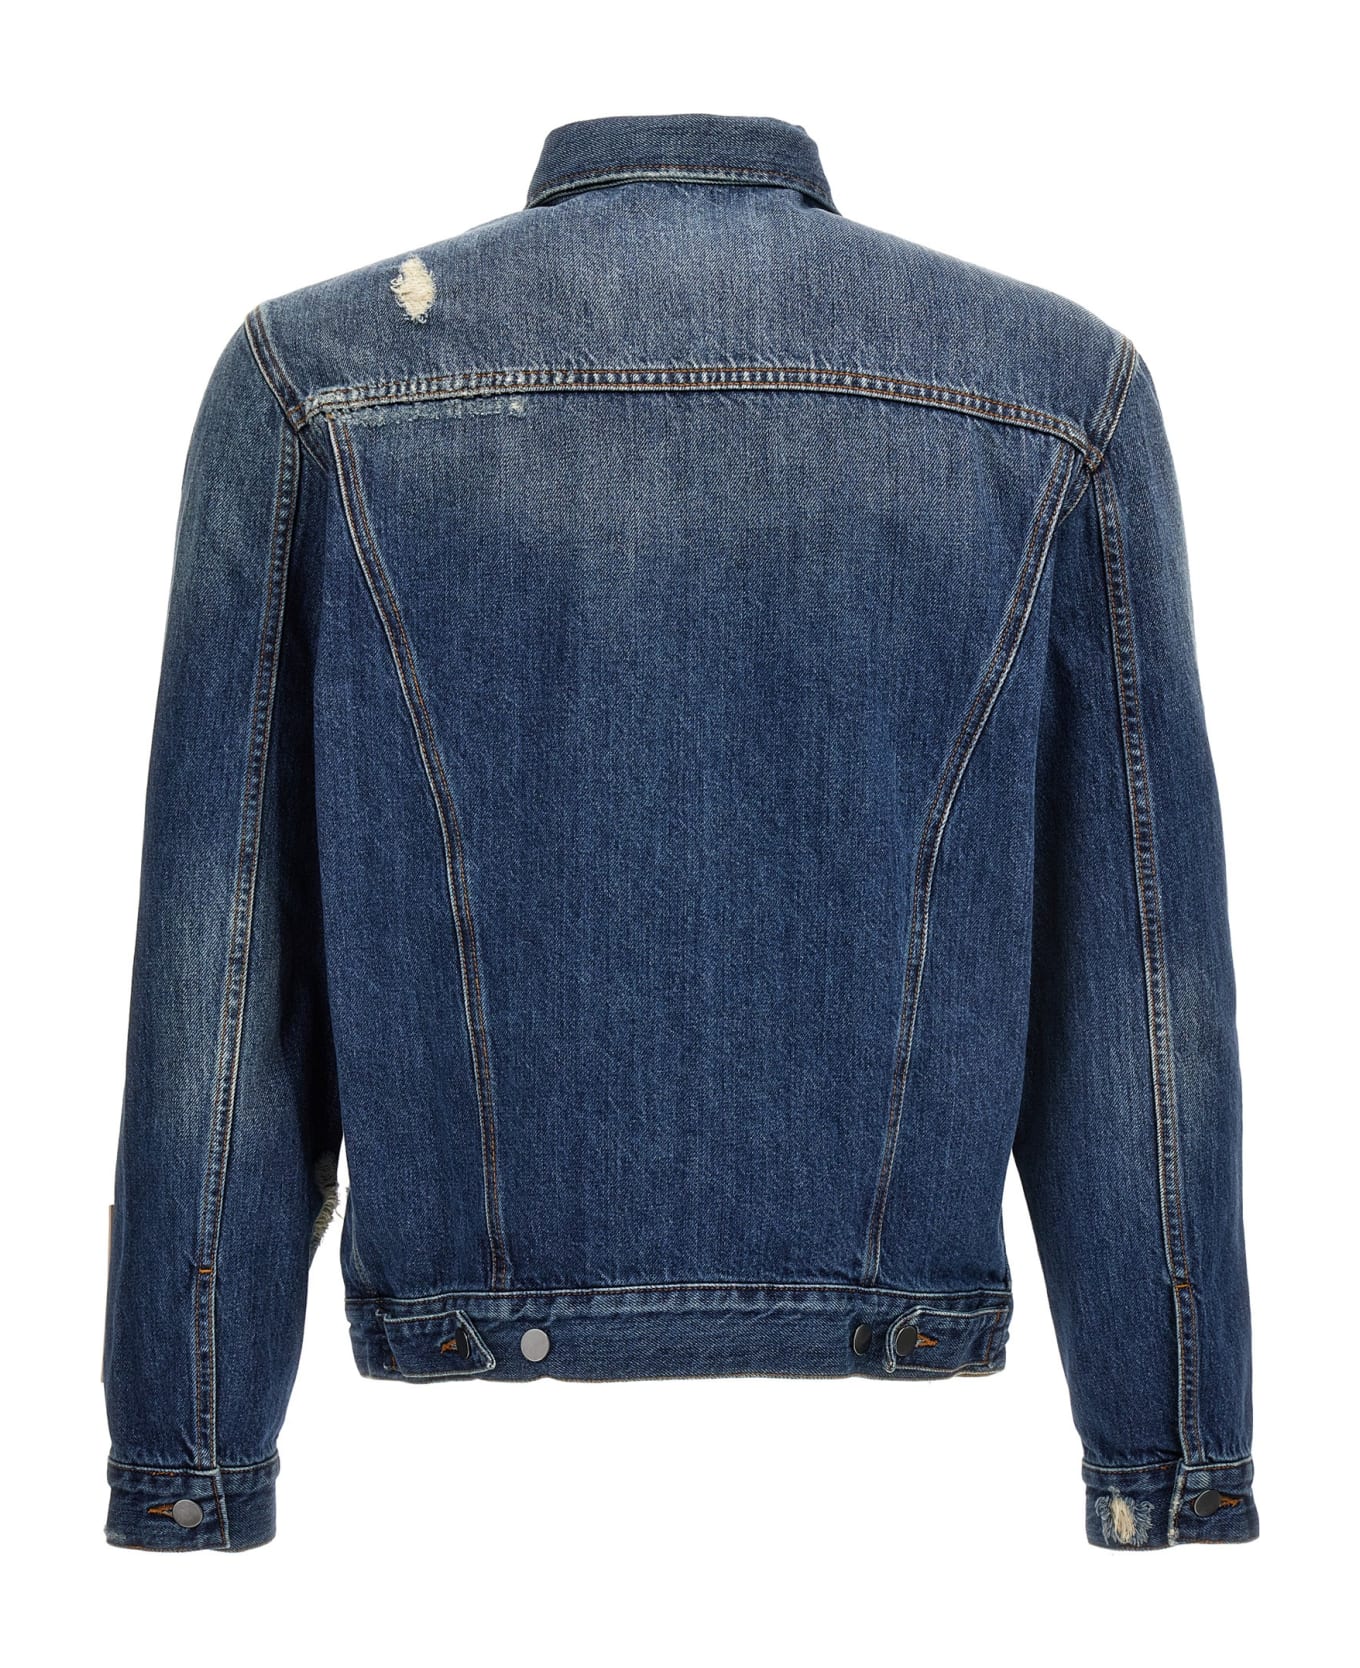 A-COLD-WALL 'foundry Selvedge' Jacket - Blue ジャケット